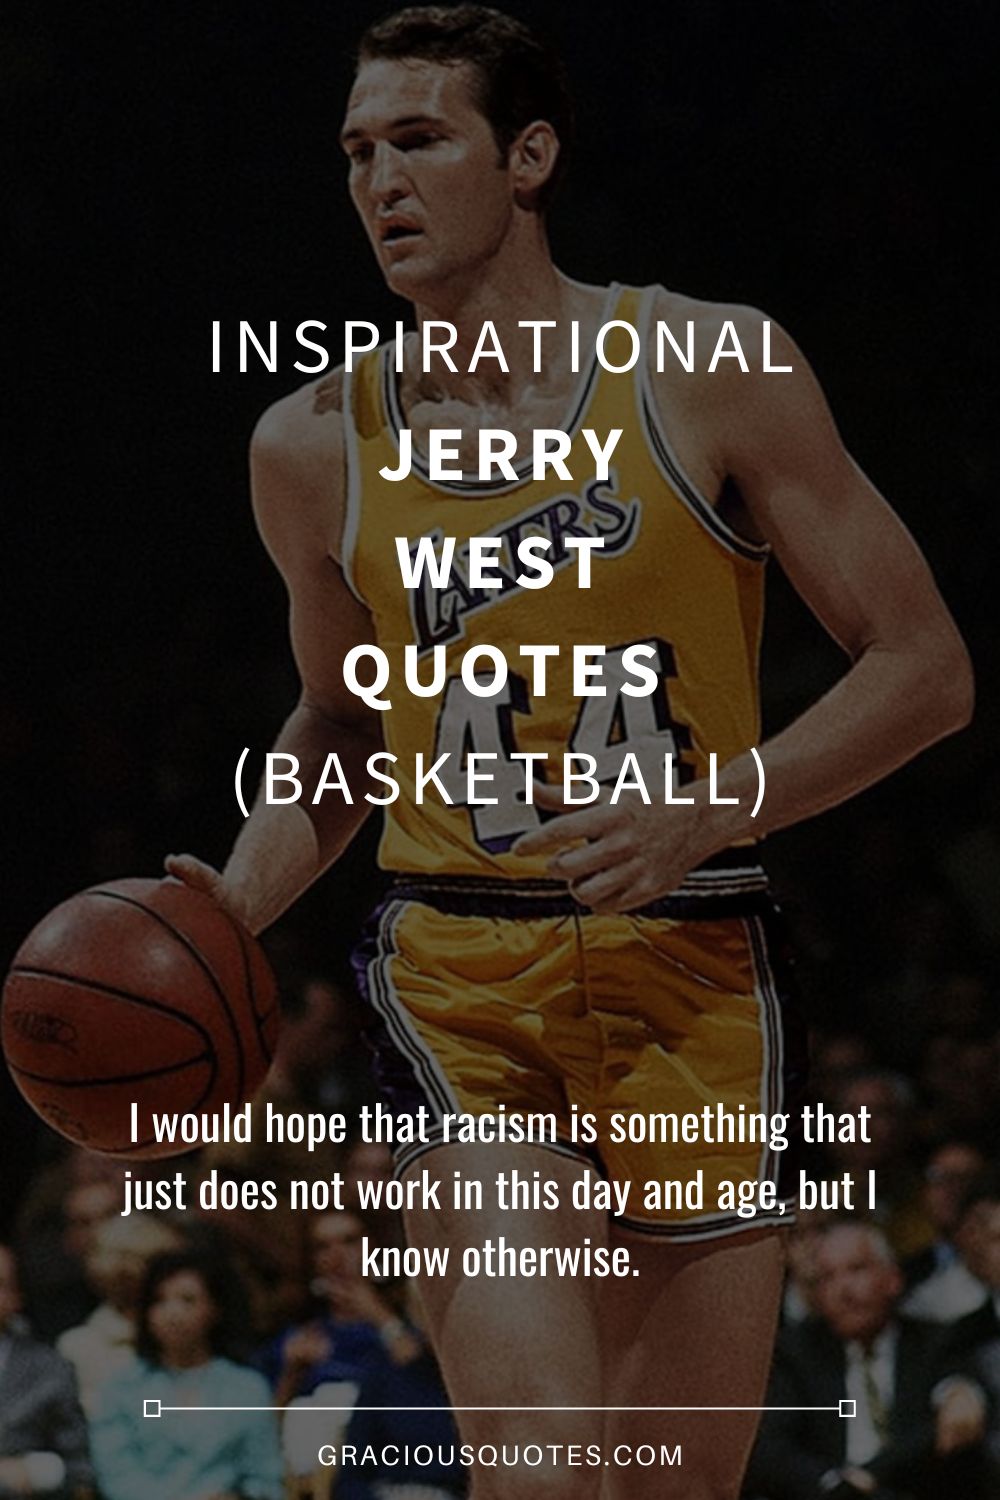 Inspirational Jerry West Quotes (BASKETBALL) - Gracious Quotes